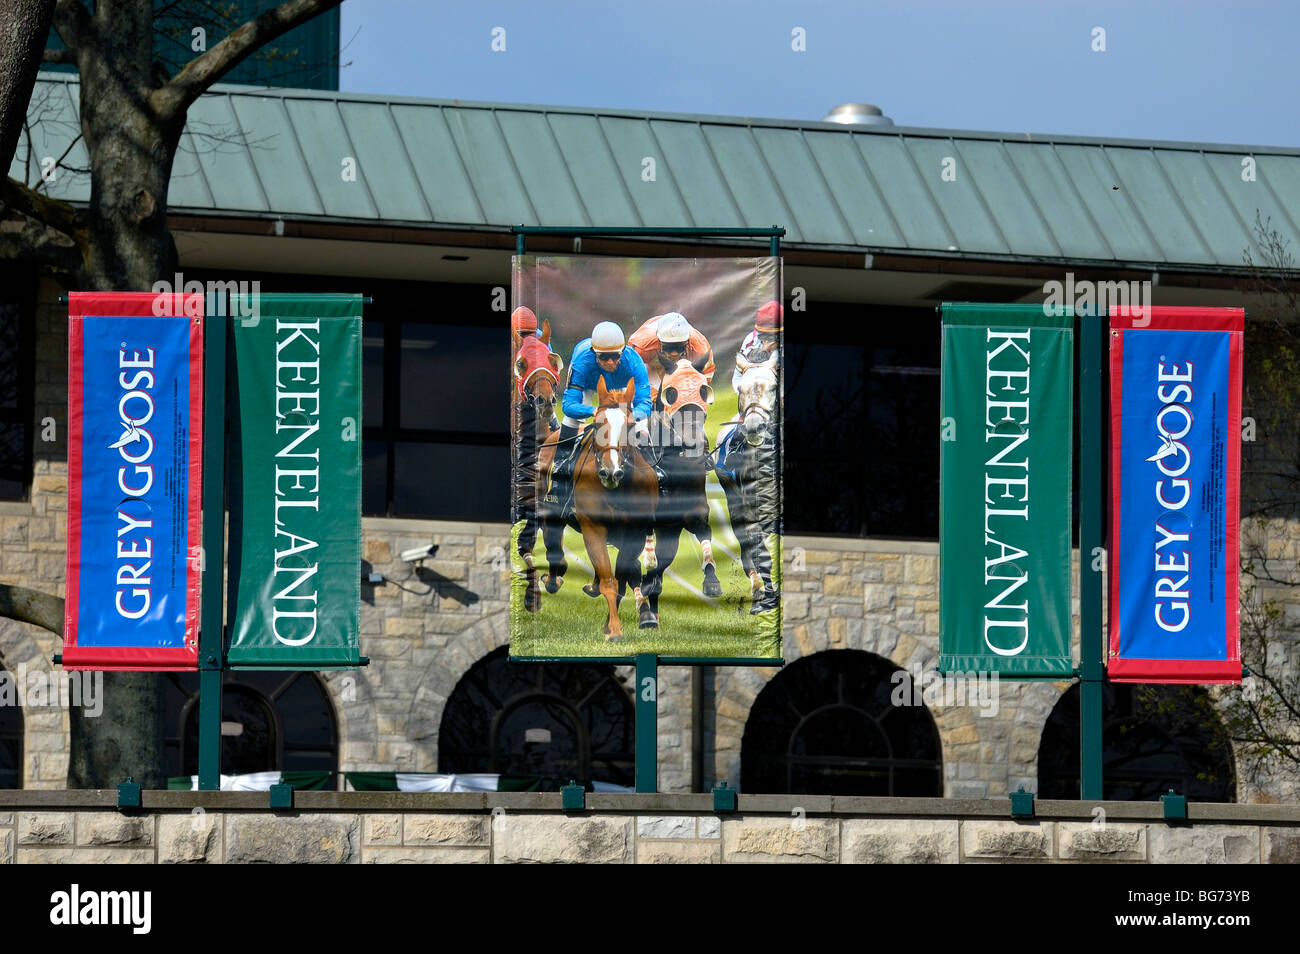 Banners hung at the Keeneland thoroughbred racecourse in Lexington, Kentucky, USA. Stock Photo